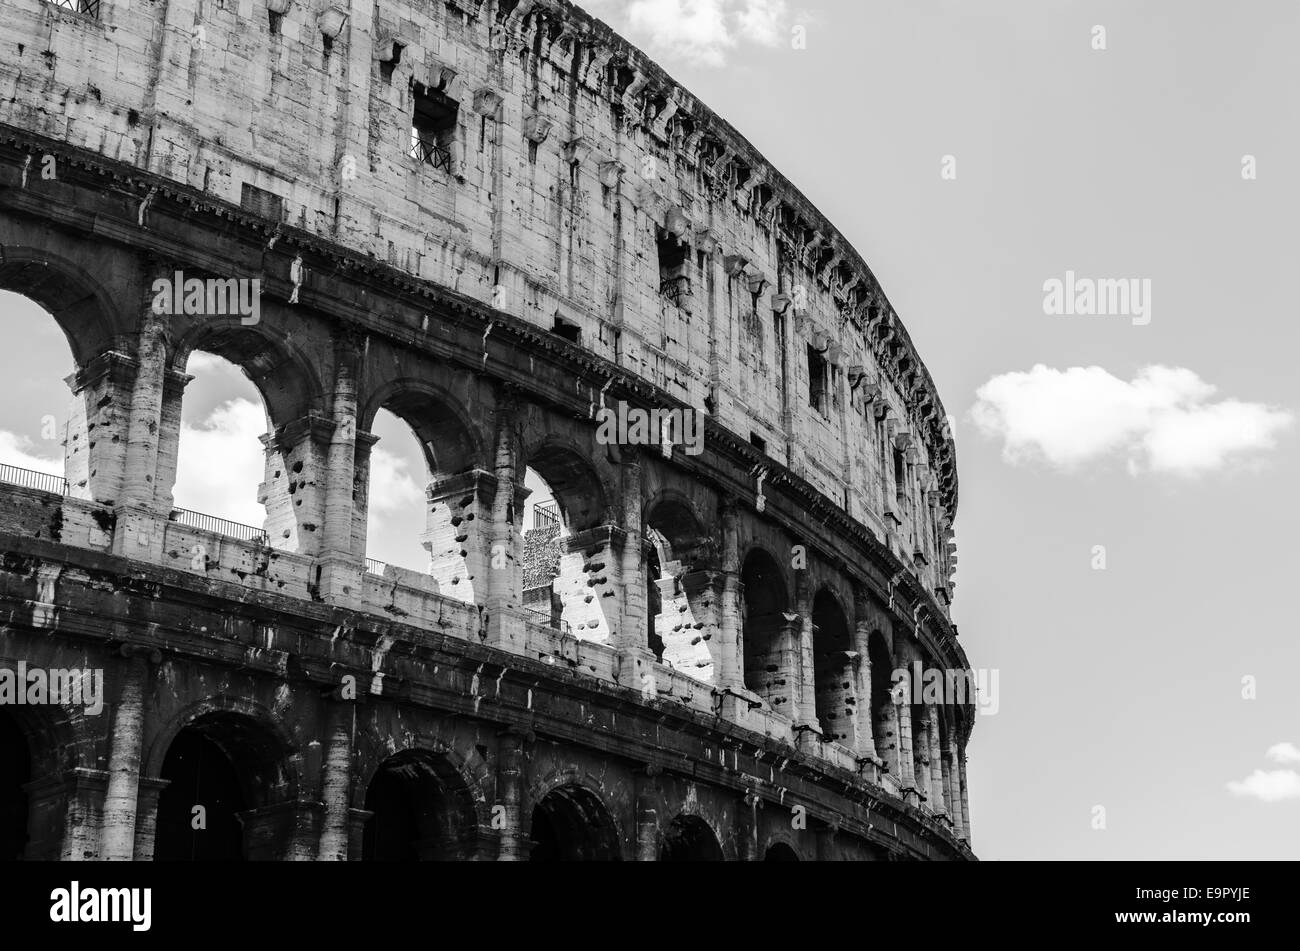 Rome - The Colosseum or Coliseum, also known as the Flavian Amphitheatre. Stock Photo